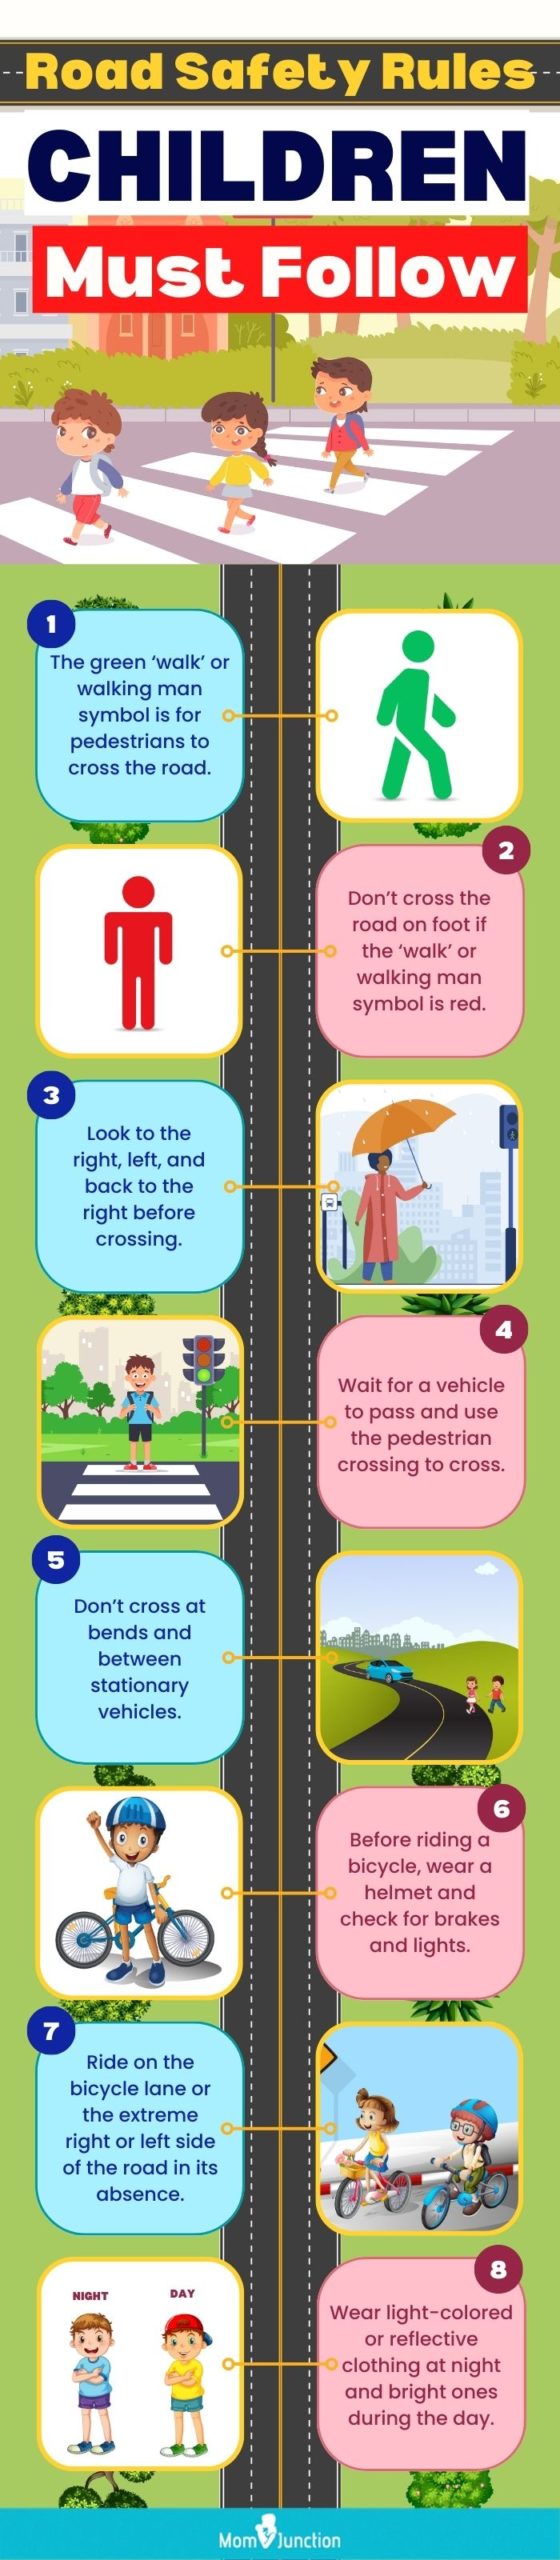 road safety rules children must follow (infographic)